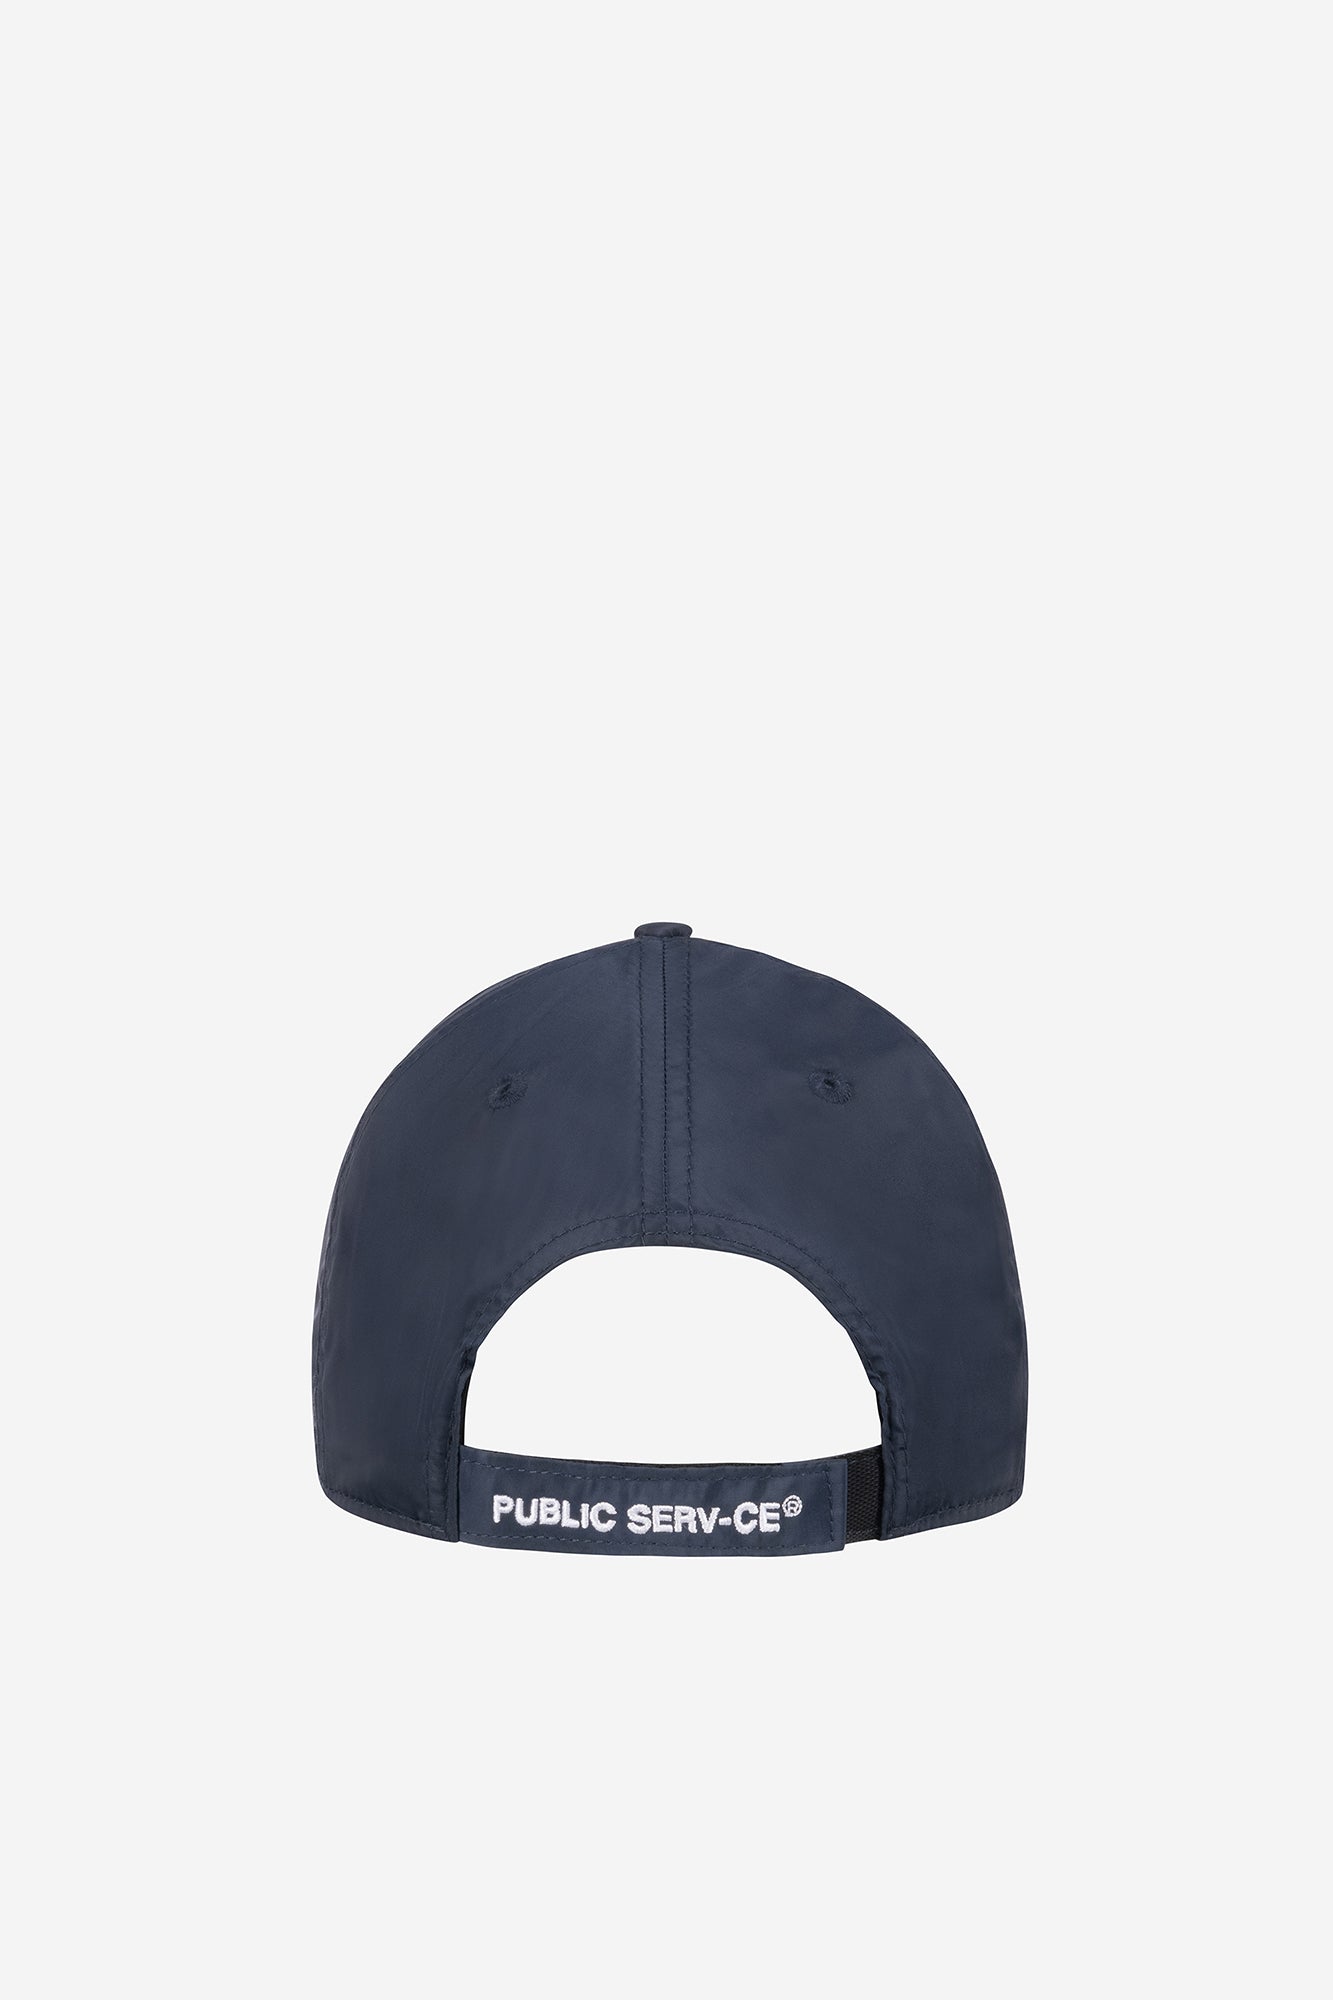 alt="back of blue cap with logo embroidered on cap strap"